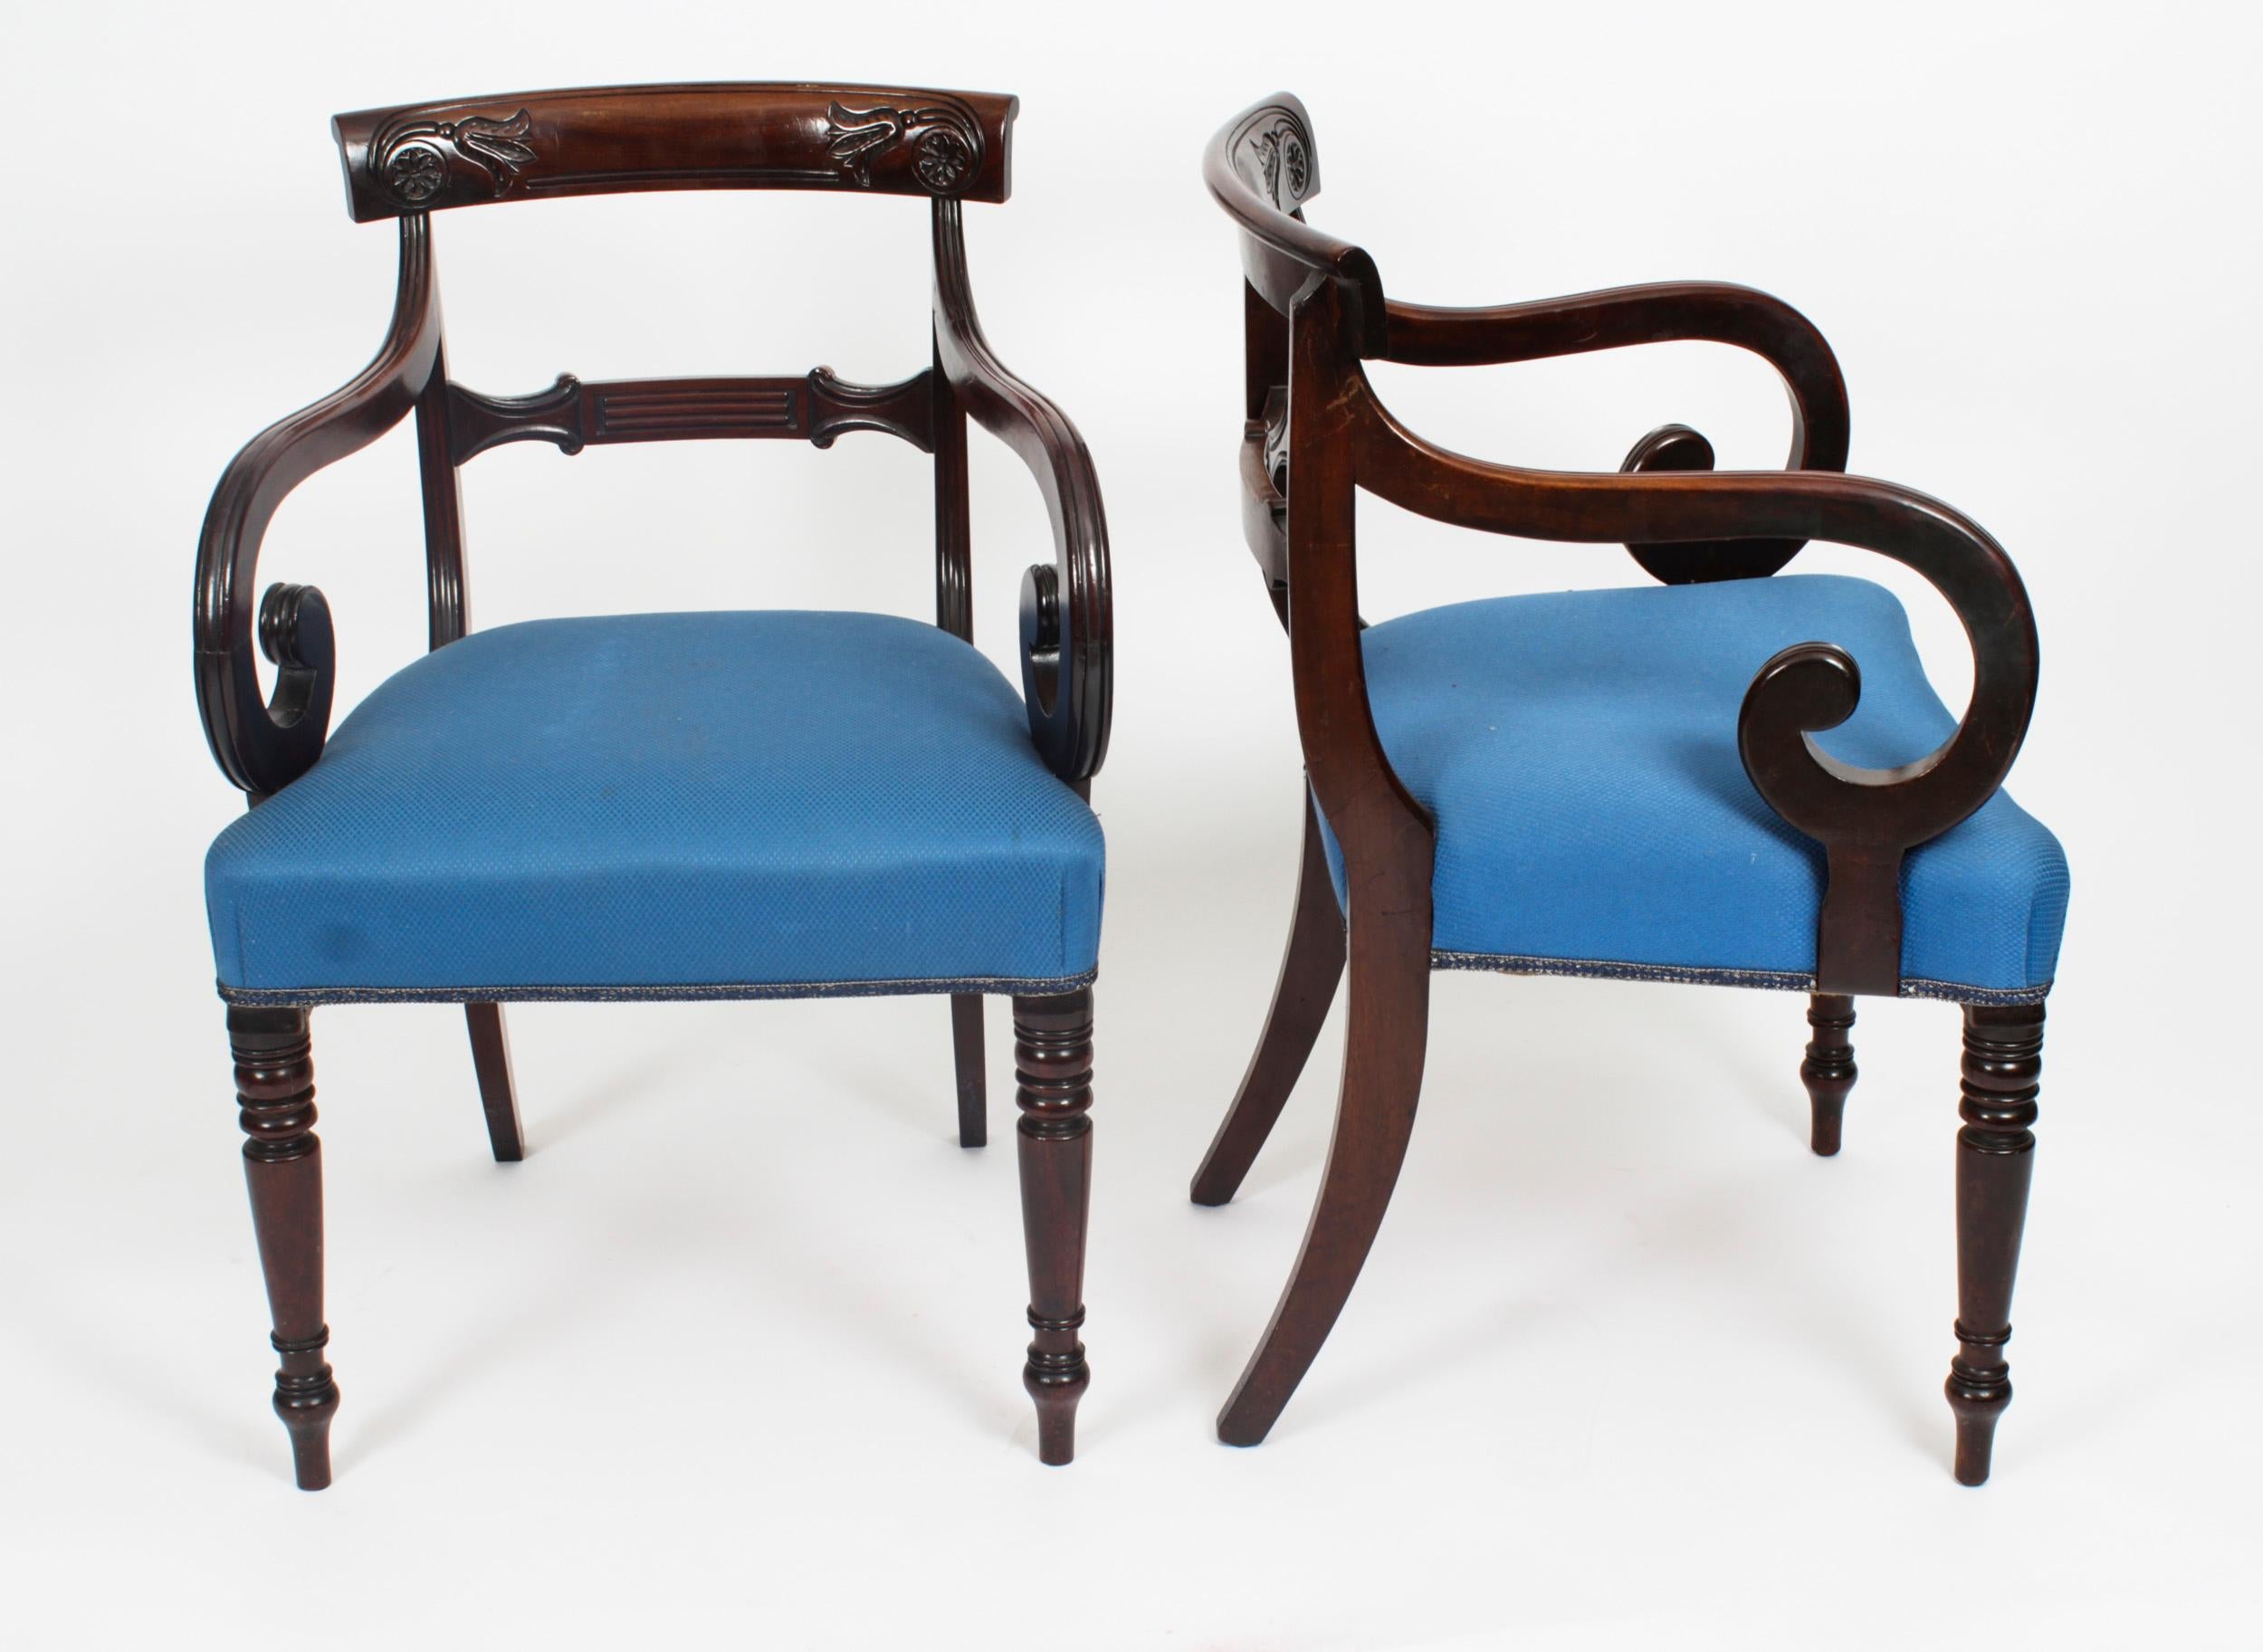 A fabulous set of eight late Regency Period mahogany dining chairs, Circa 1830 in date.
The set comprising six side chairs and two armchairs, the curved rectangular top rails with stylised floral carving. The stuff over seats are upholstered in a